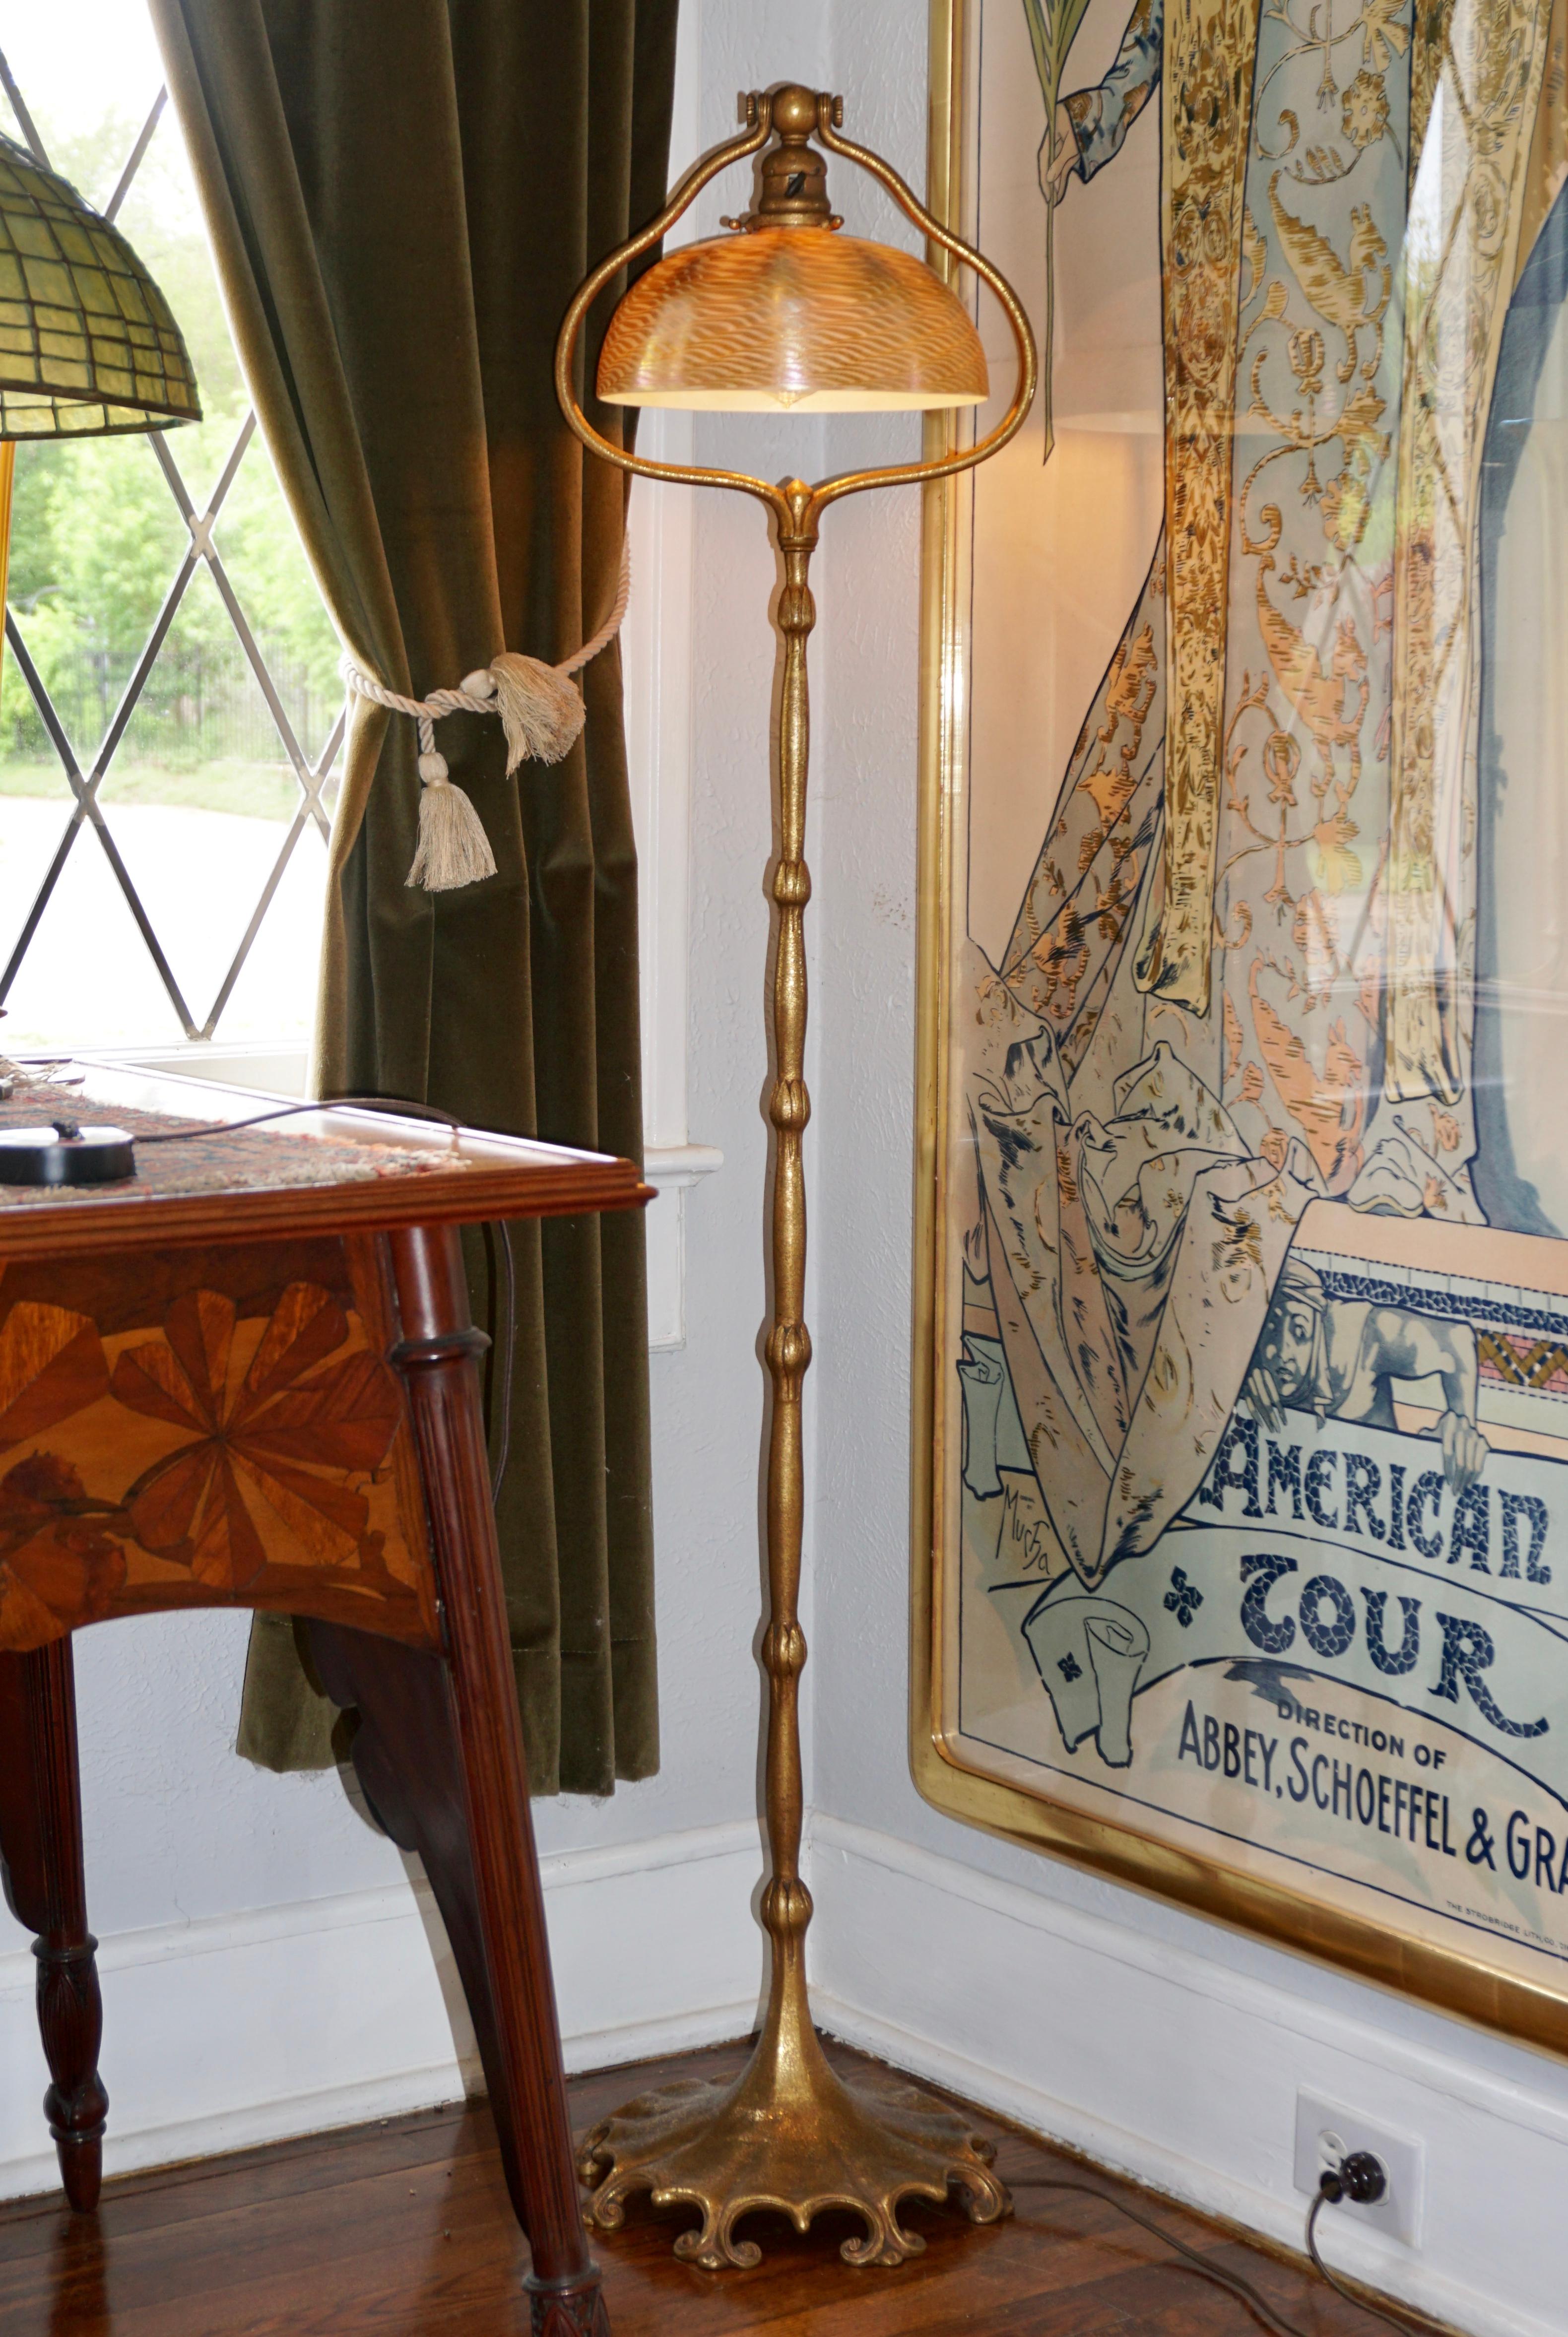 Tiffany Studios damascene floor lamp. 

This exceptional Tiffany Studios floor lamp has a bronze harp base with a wonderful orange peel textured gilt gold patinated patina and ornate decorative footing. Base supports a gold damascene shade with gold